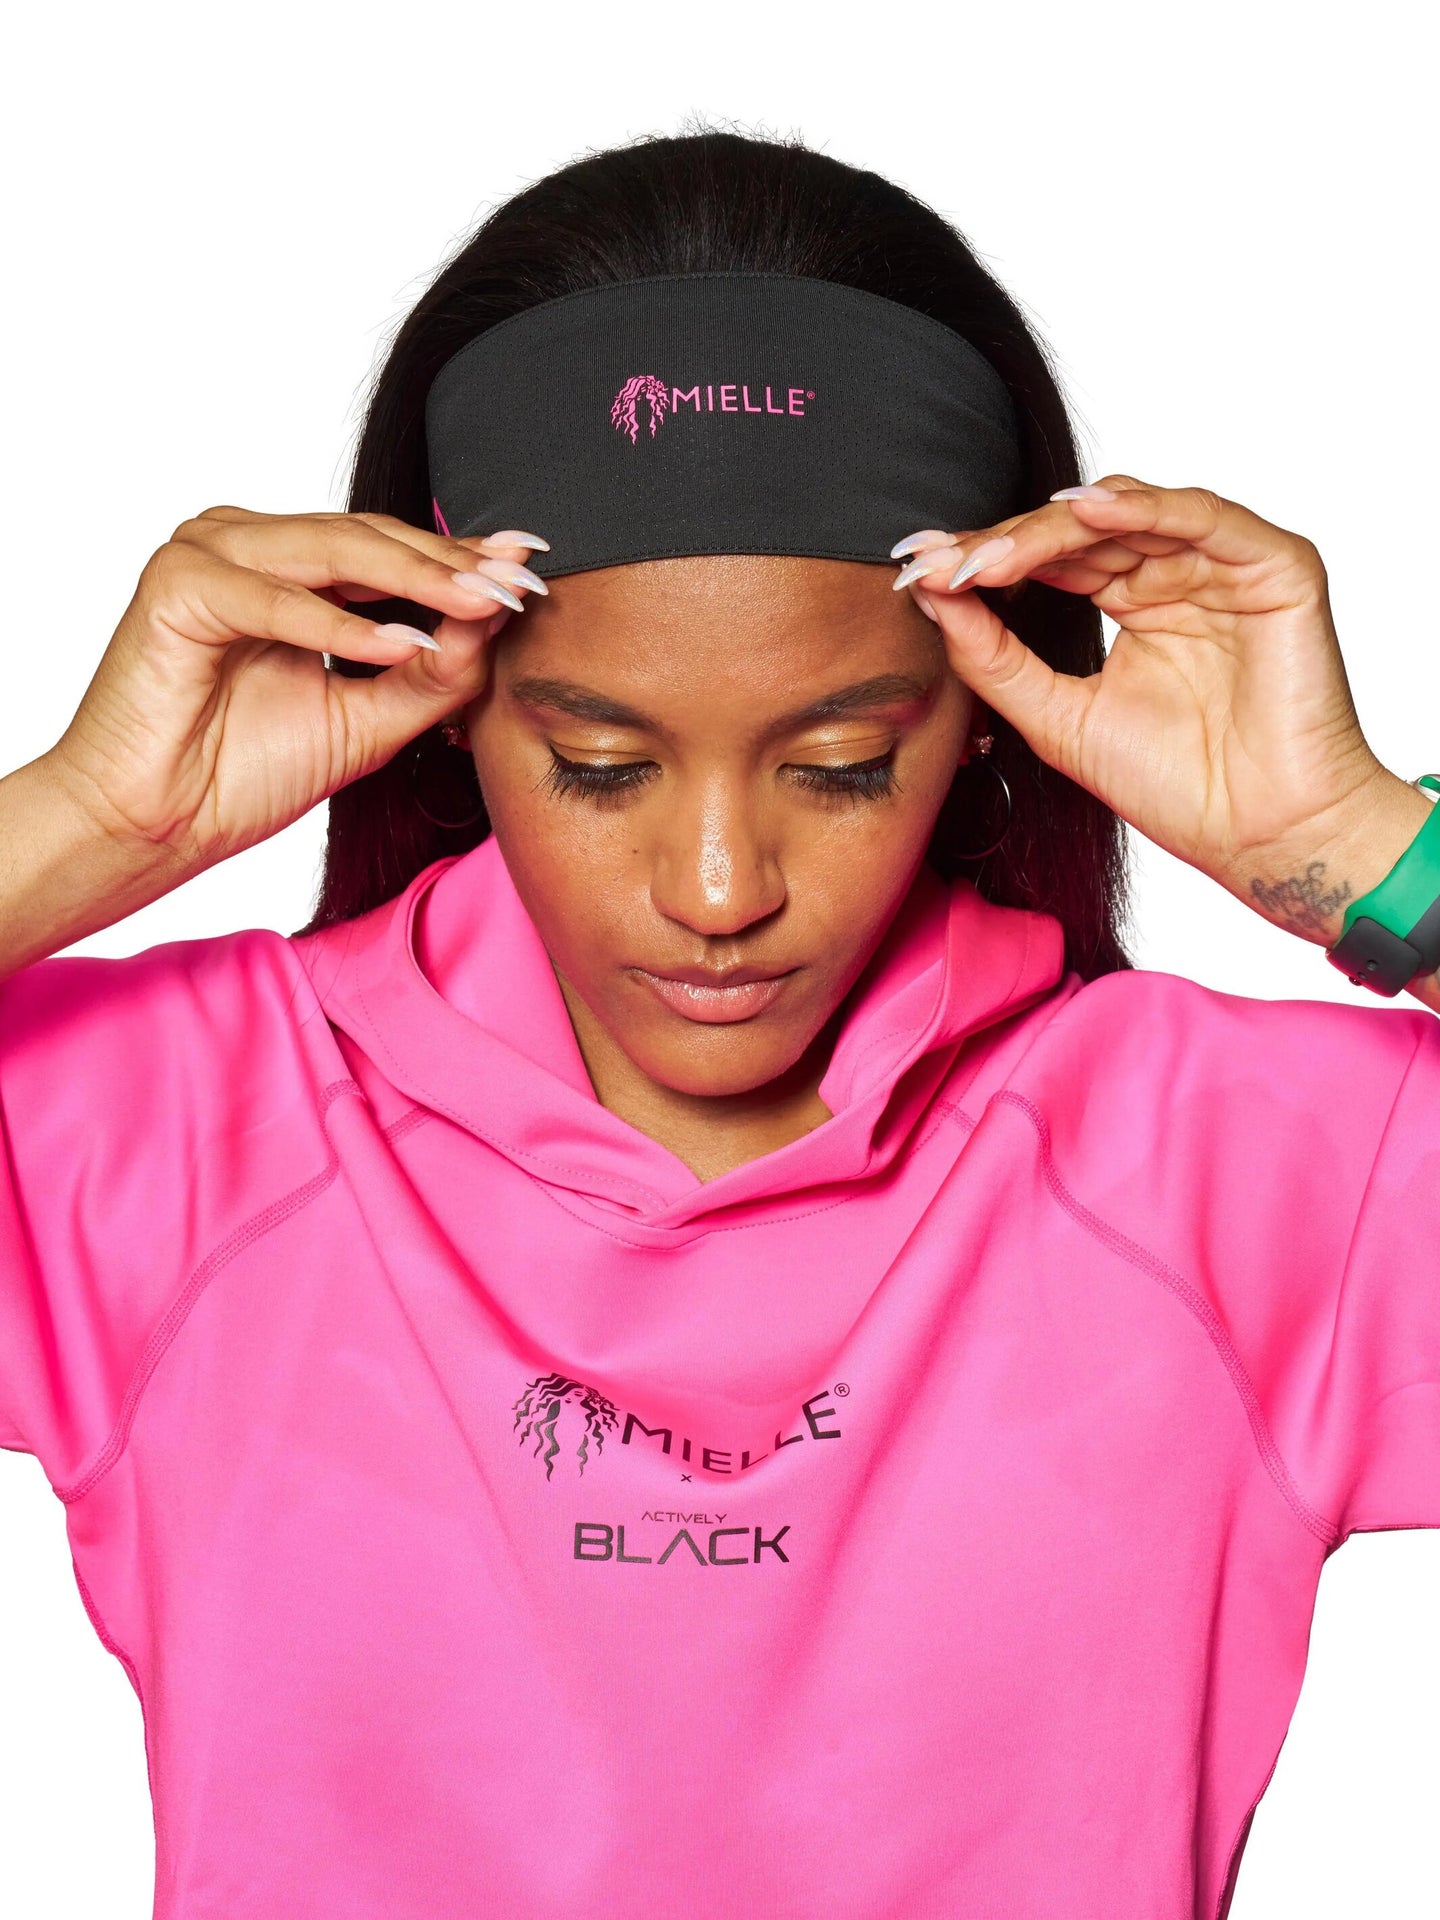 Actively Black x Mielle Pink Sweatband